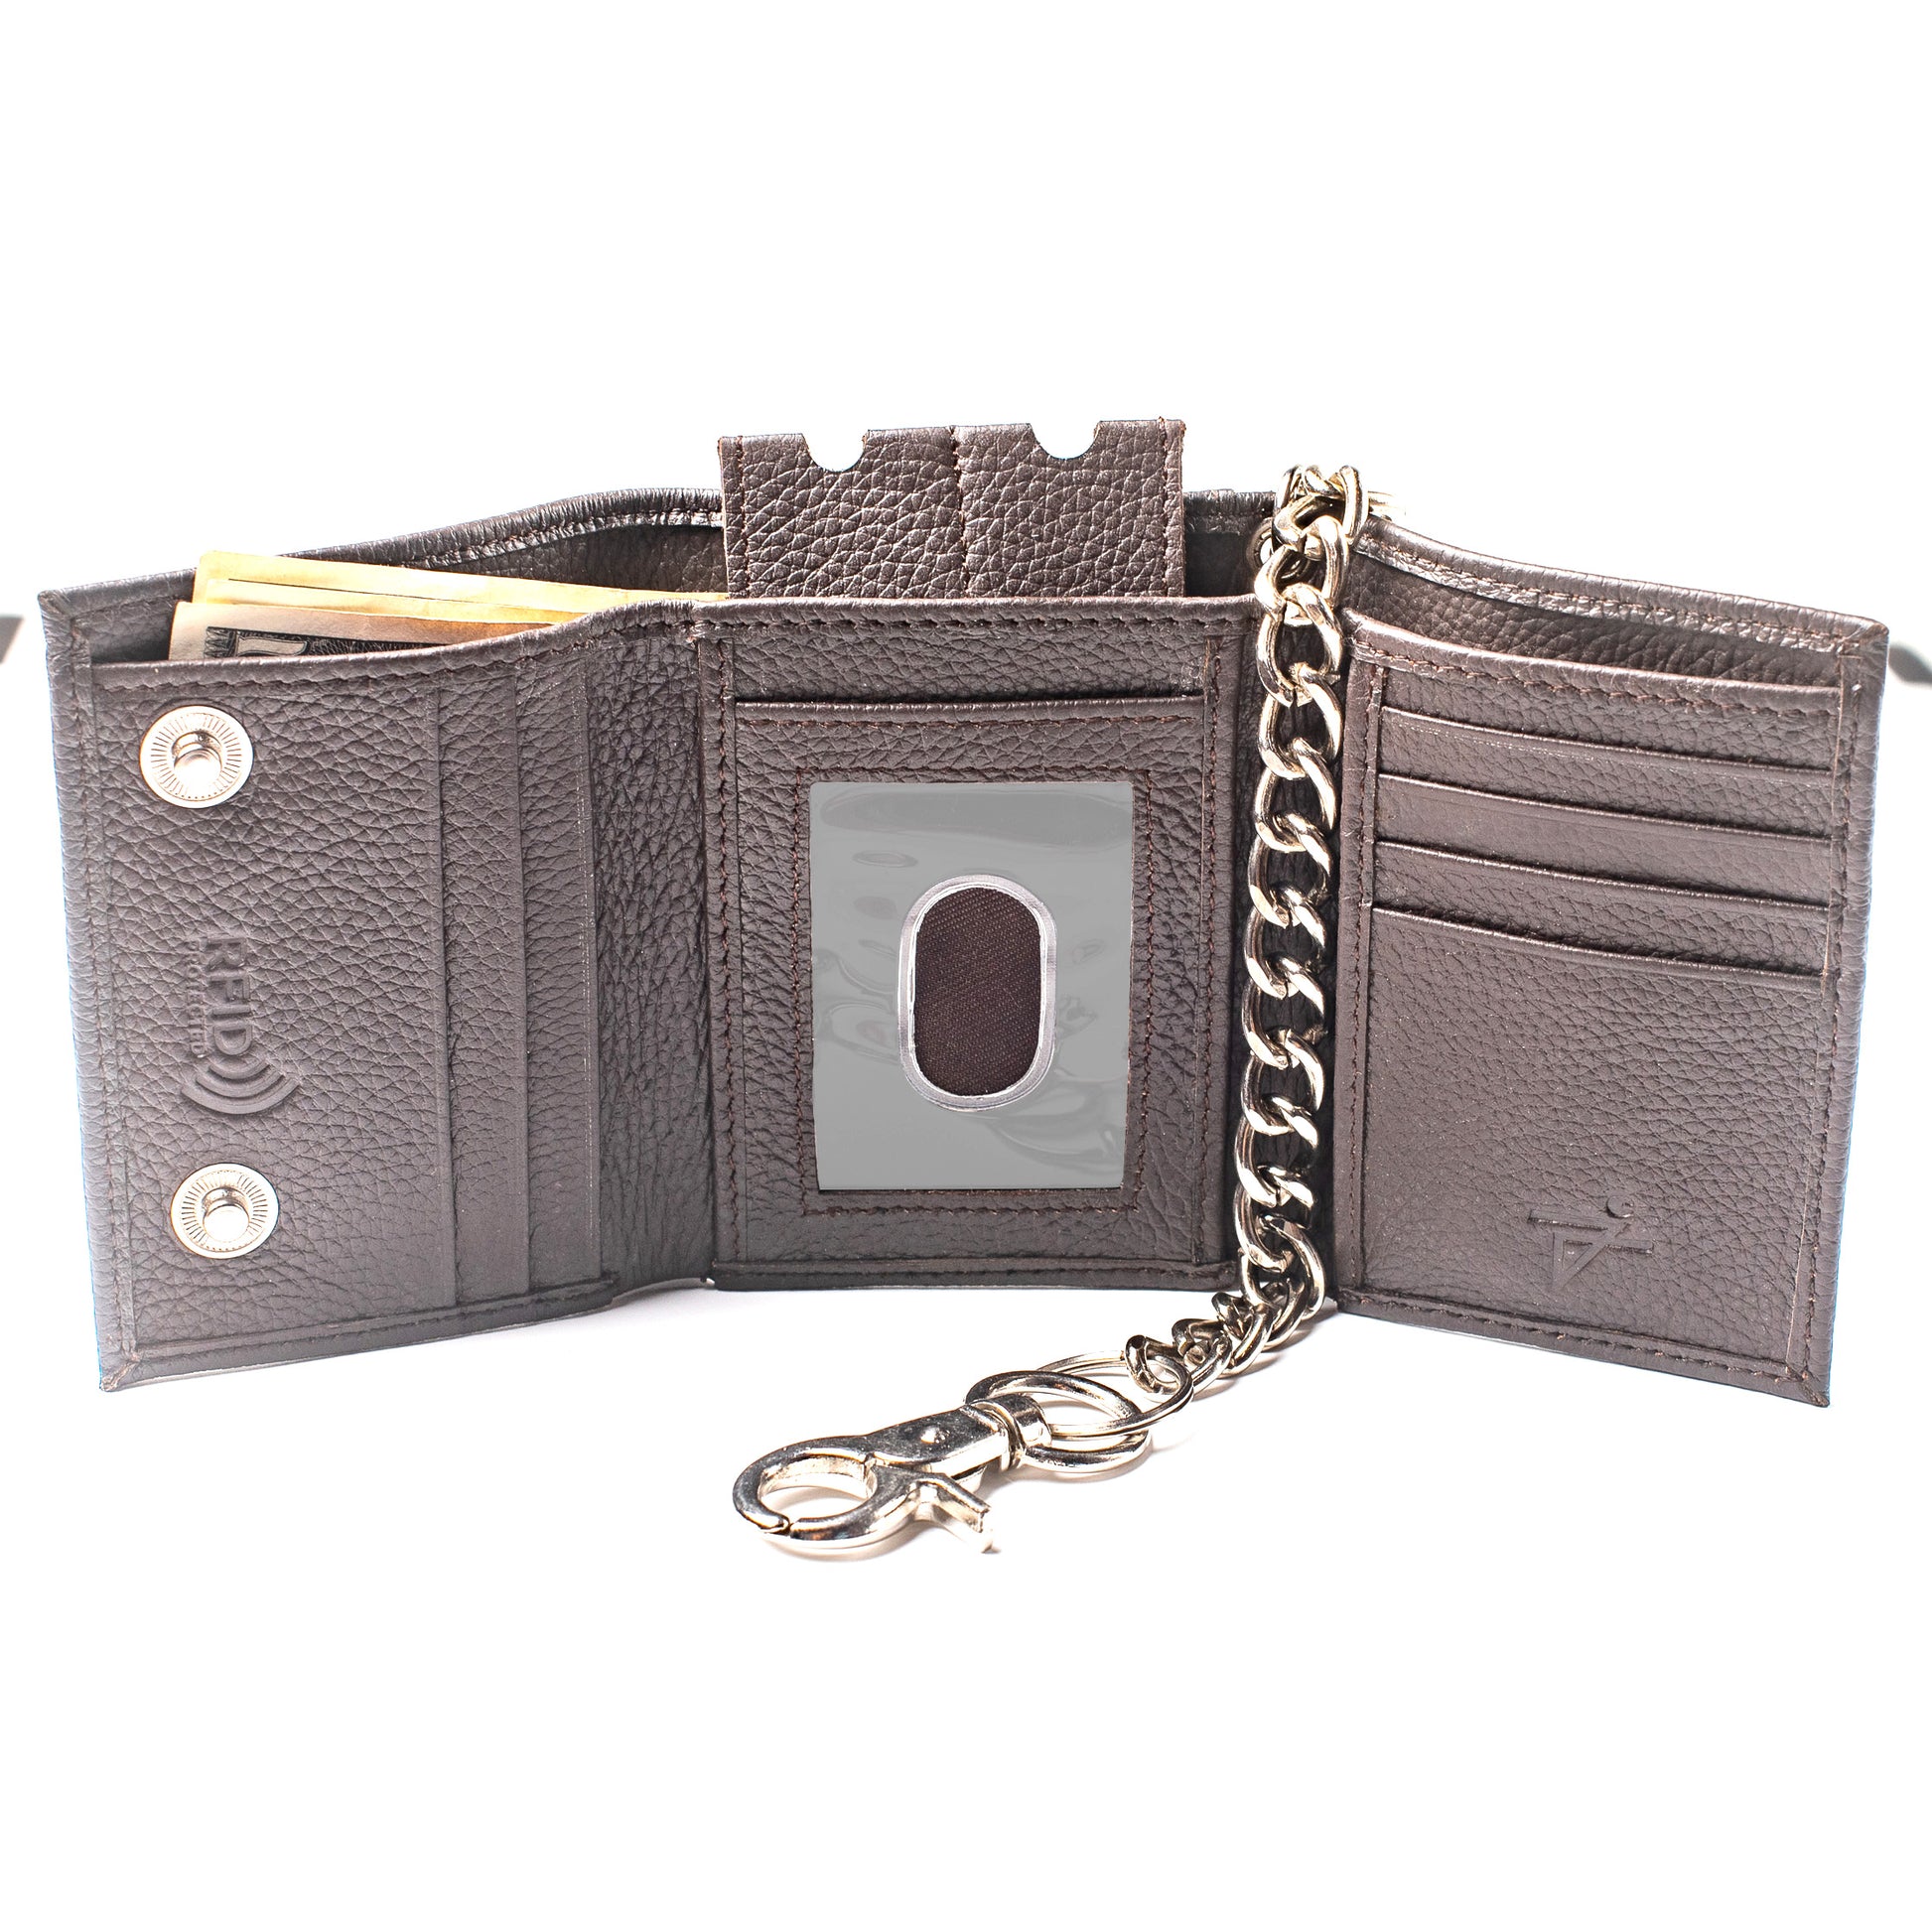 RAWHYD Full Grain Leather Trifold Chain Wallets for Men with Snap Closure,  Mens Wallet, Biker Wallet, Brown